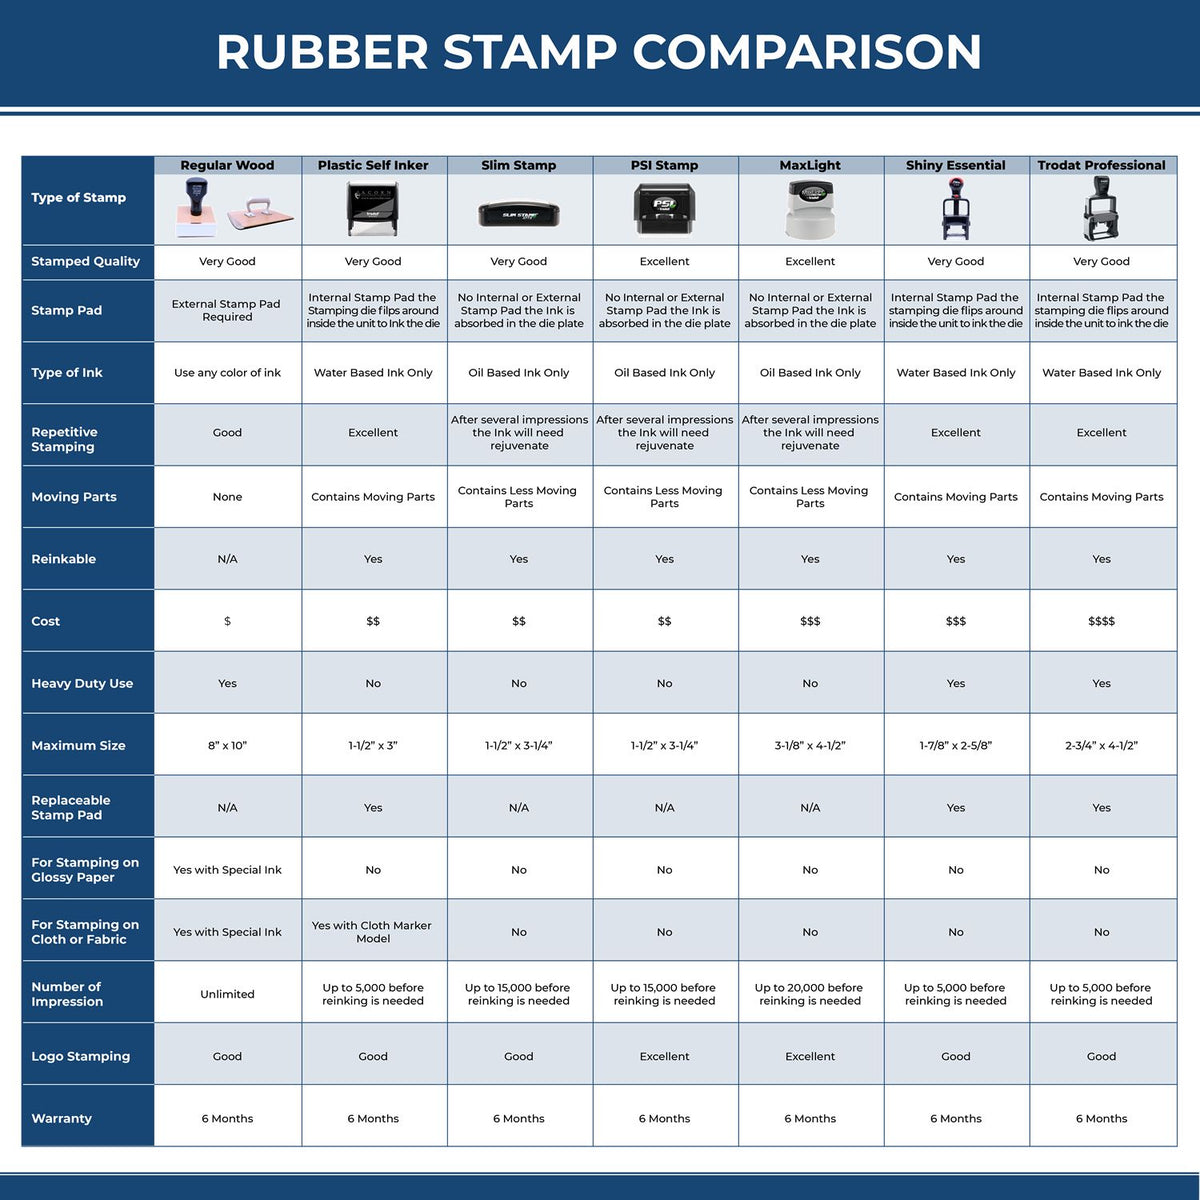 A comparison chart for the different types of mount models available for the Self-Inking Rectangular Colorado Notary Stamp.